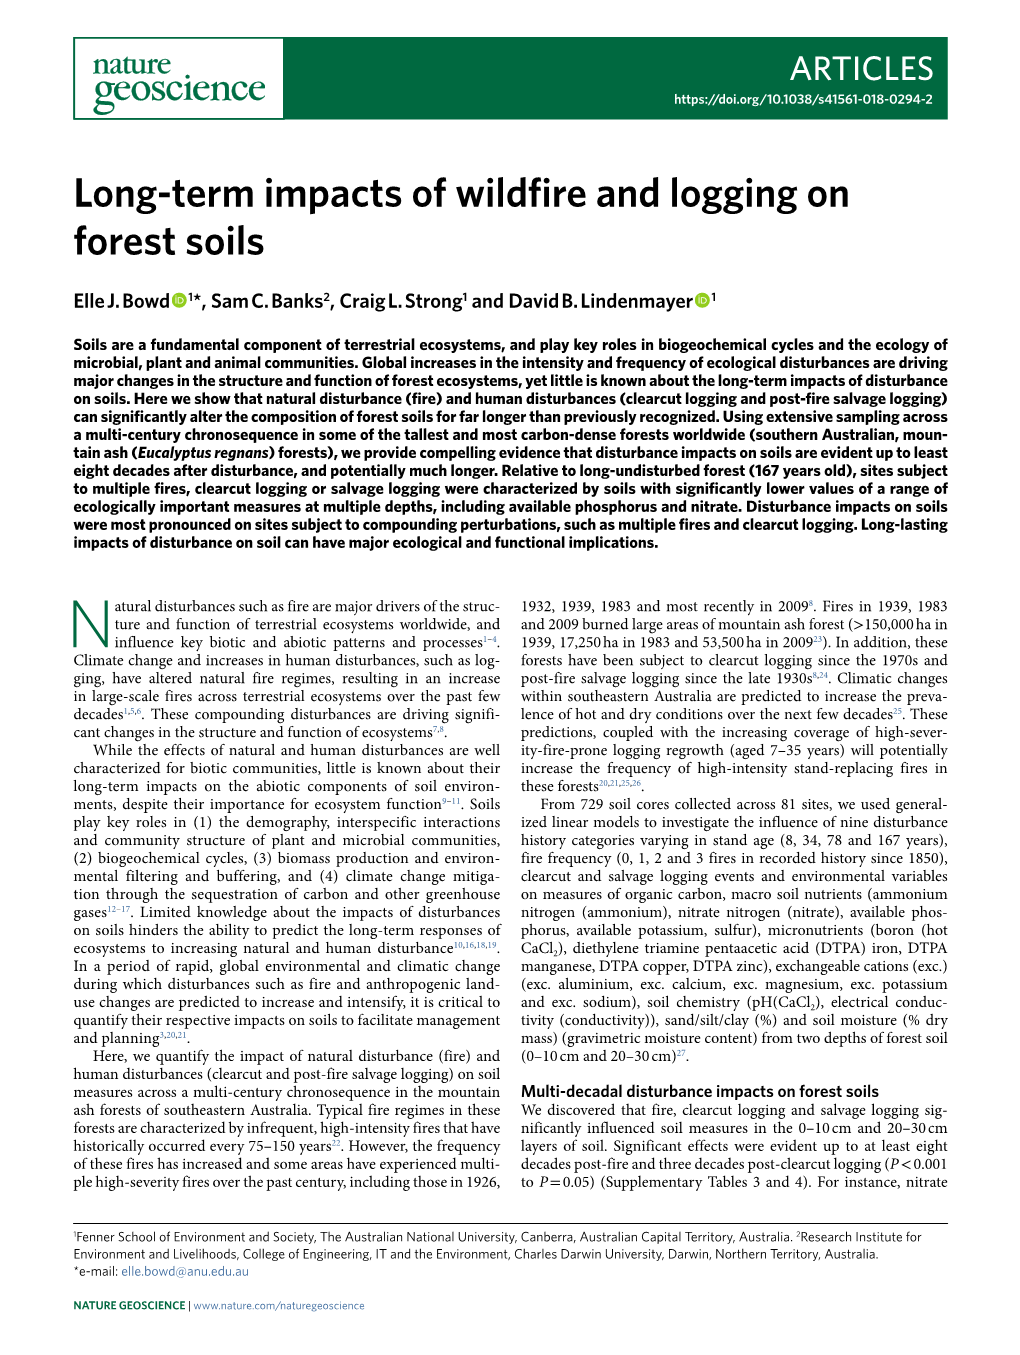 Long-Term Impacts of Wildfire and Logging on Forest Soils